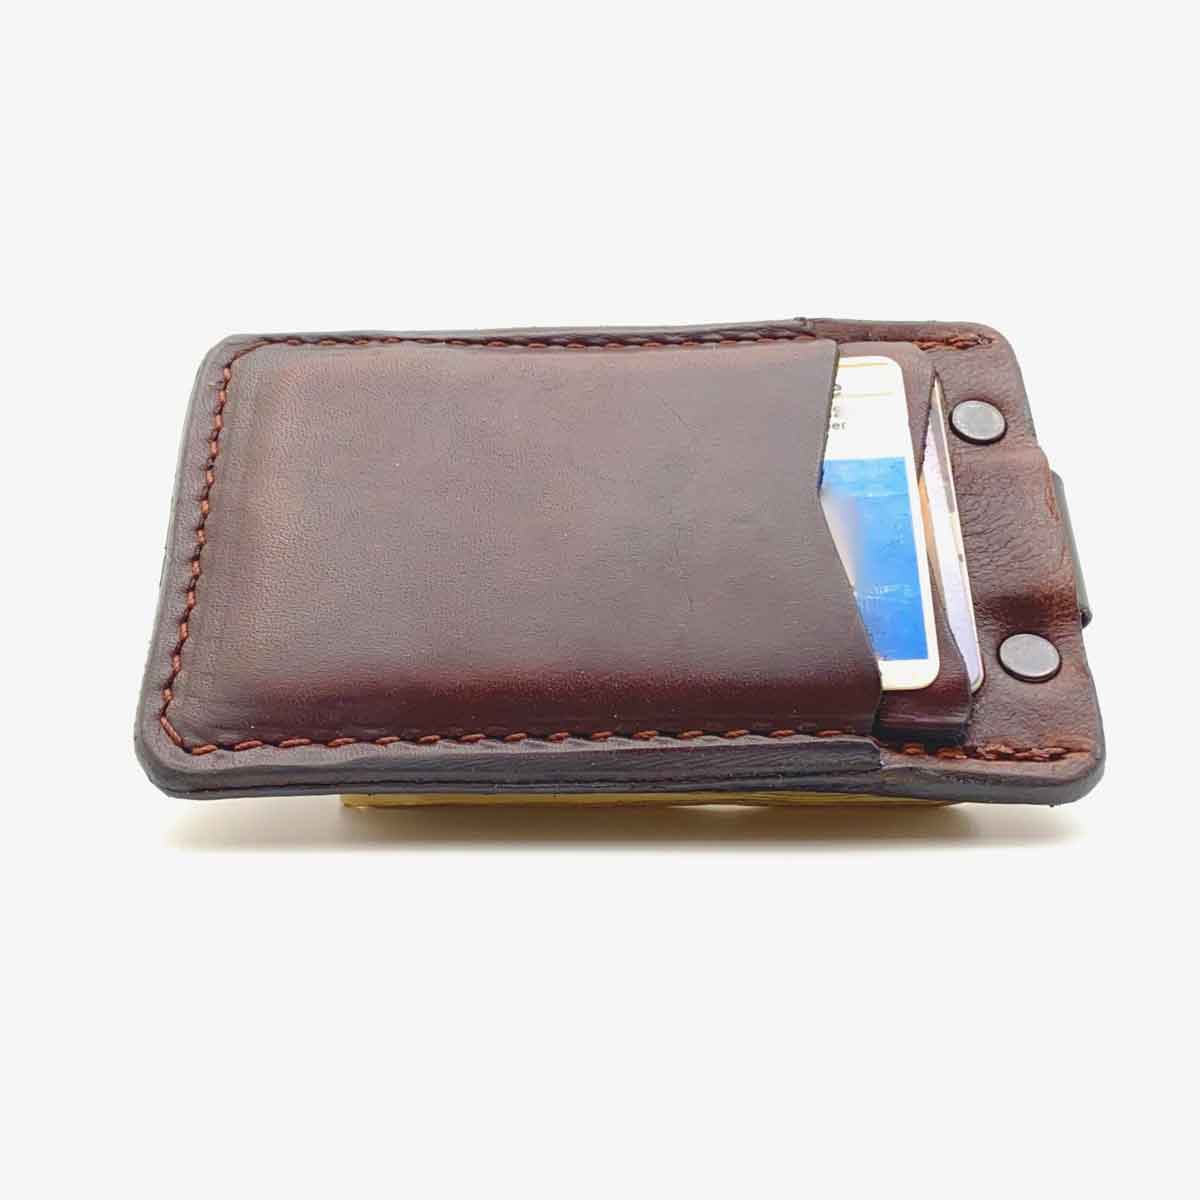 Front side of Mahogany Minimalist wallet with cards in pockets